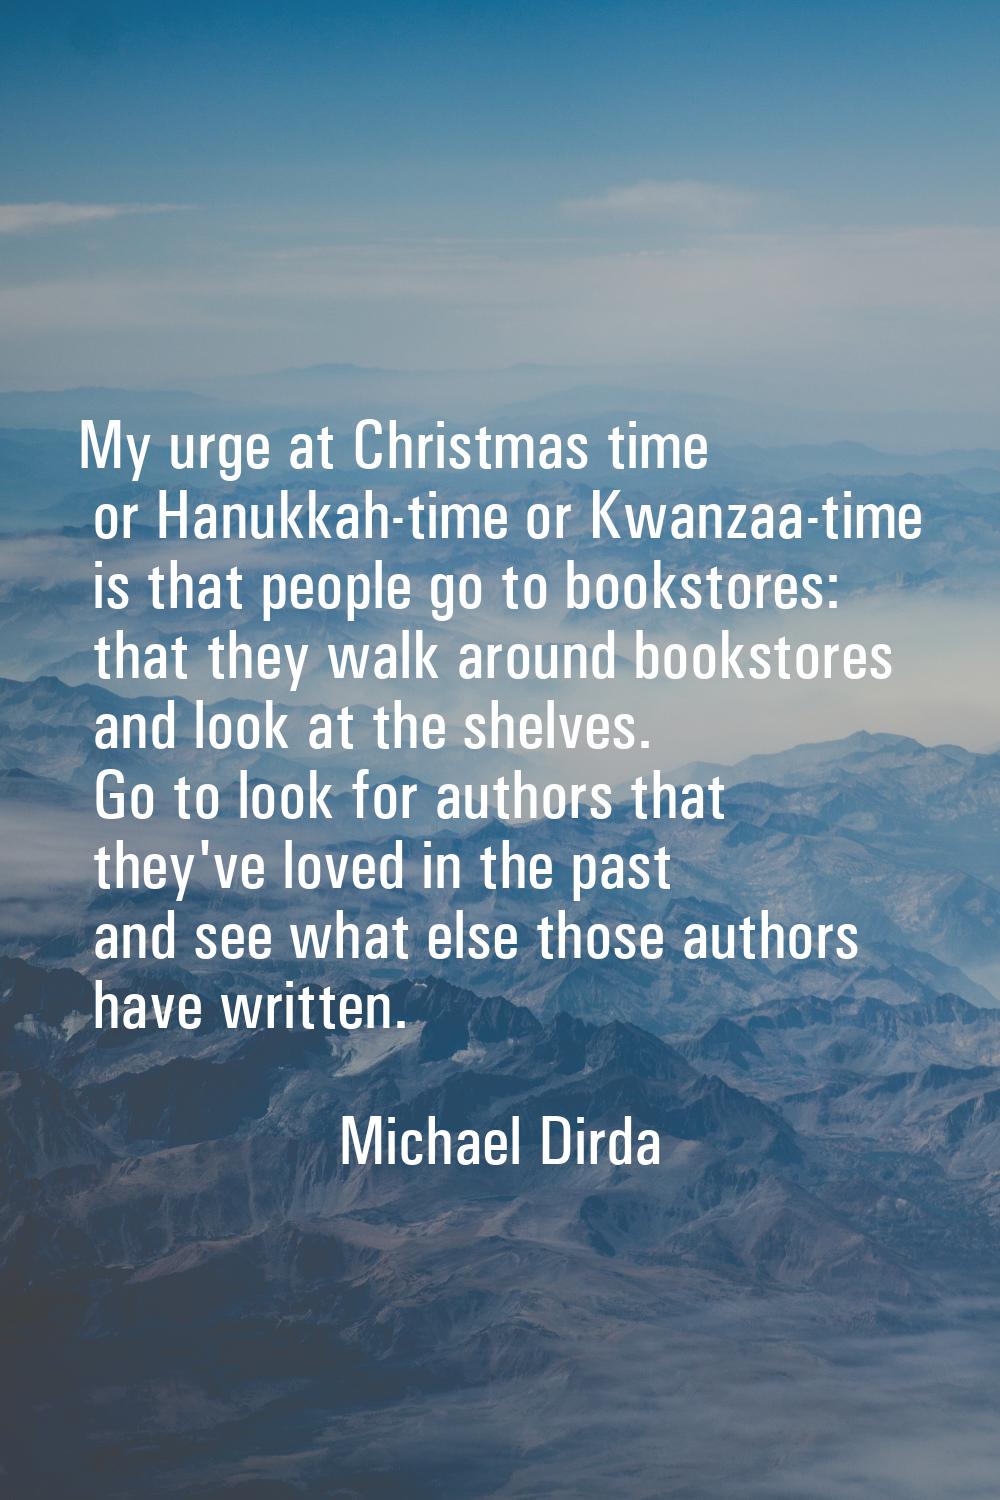 My urge at Christmas time or Hanukkah-time or Kwanzaa-time is that people go to bookstores: that th